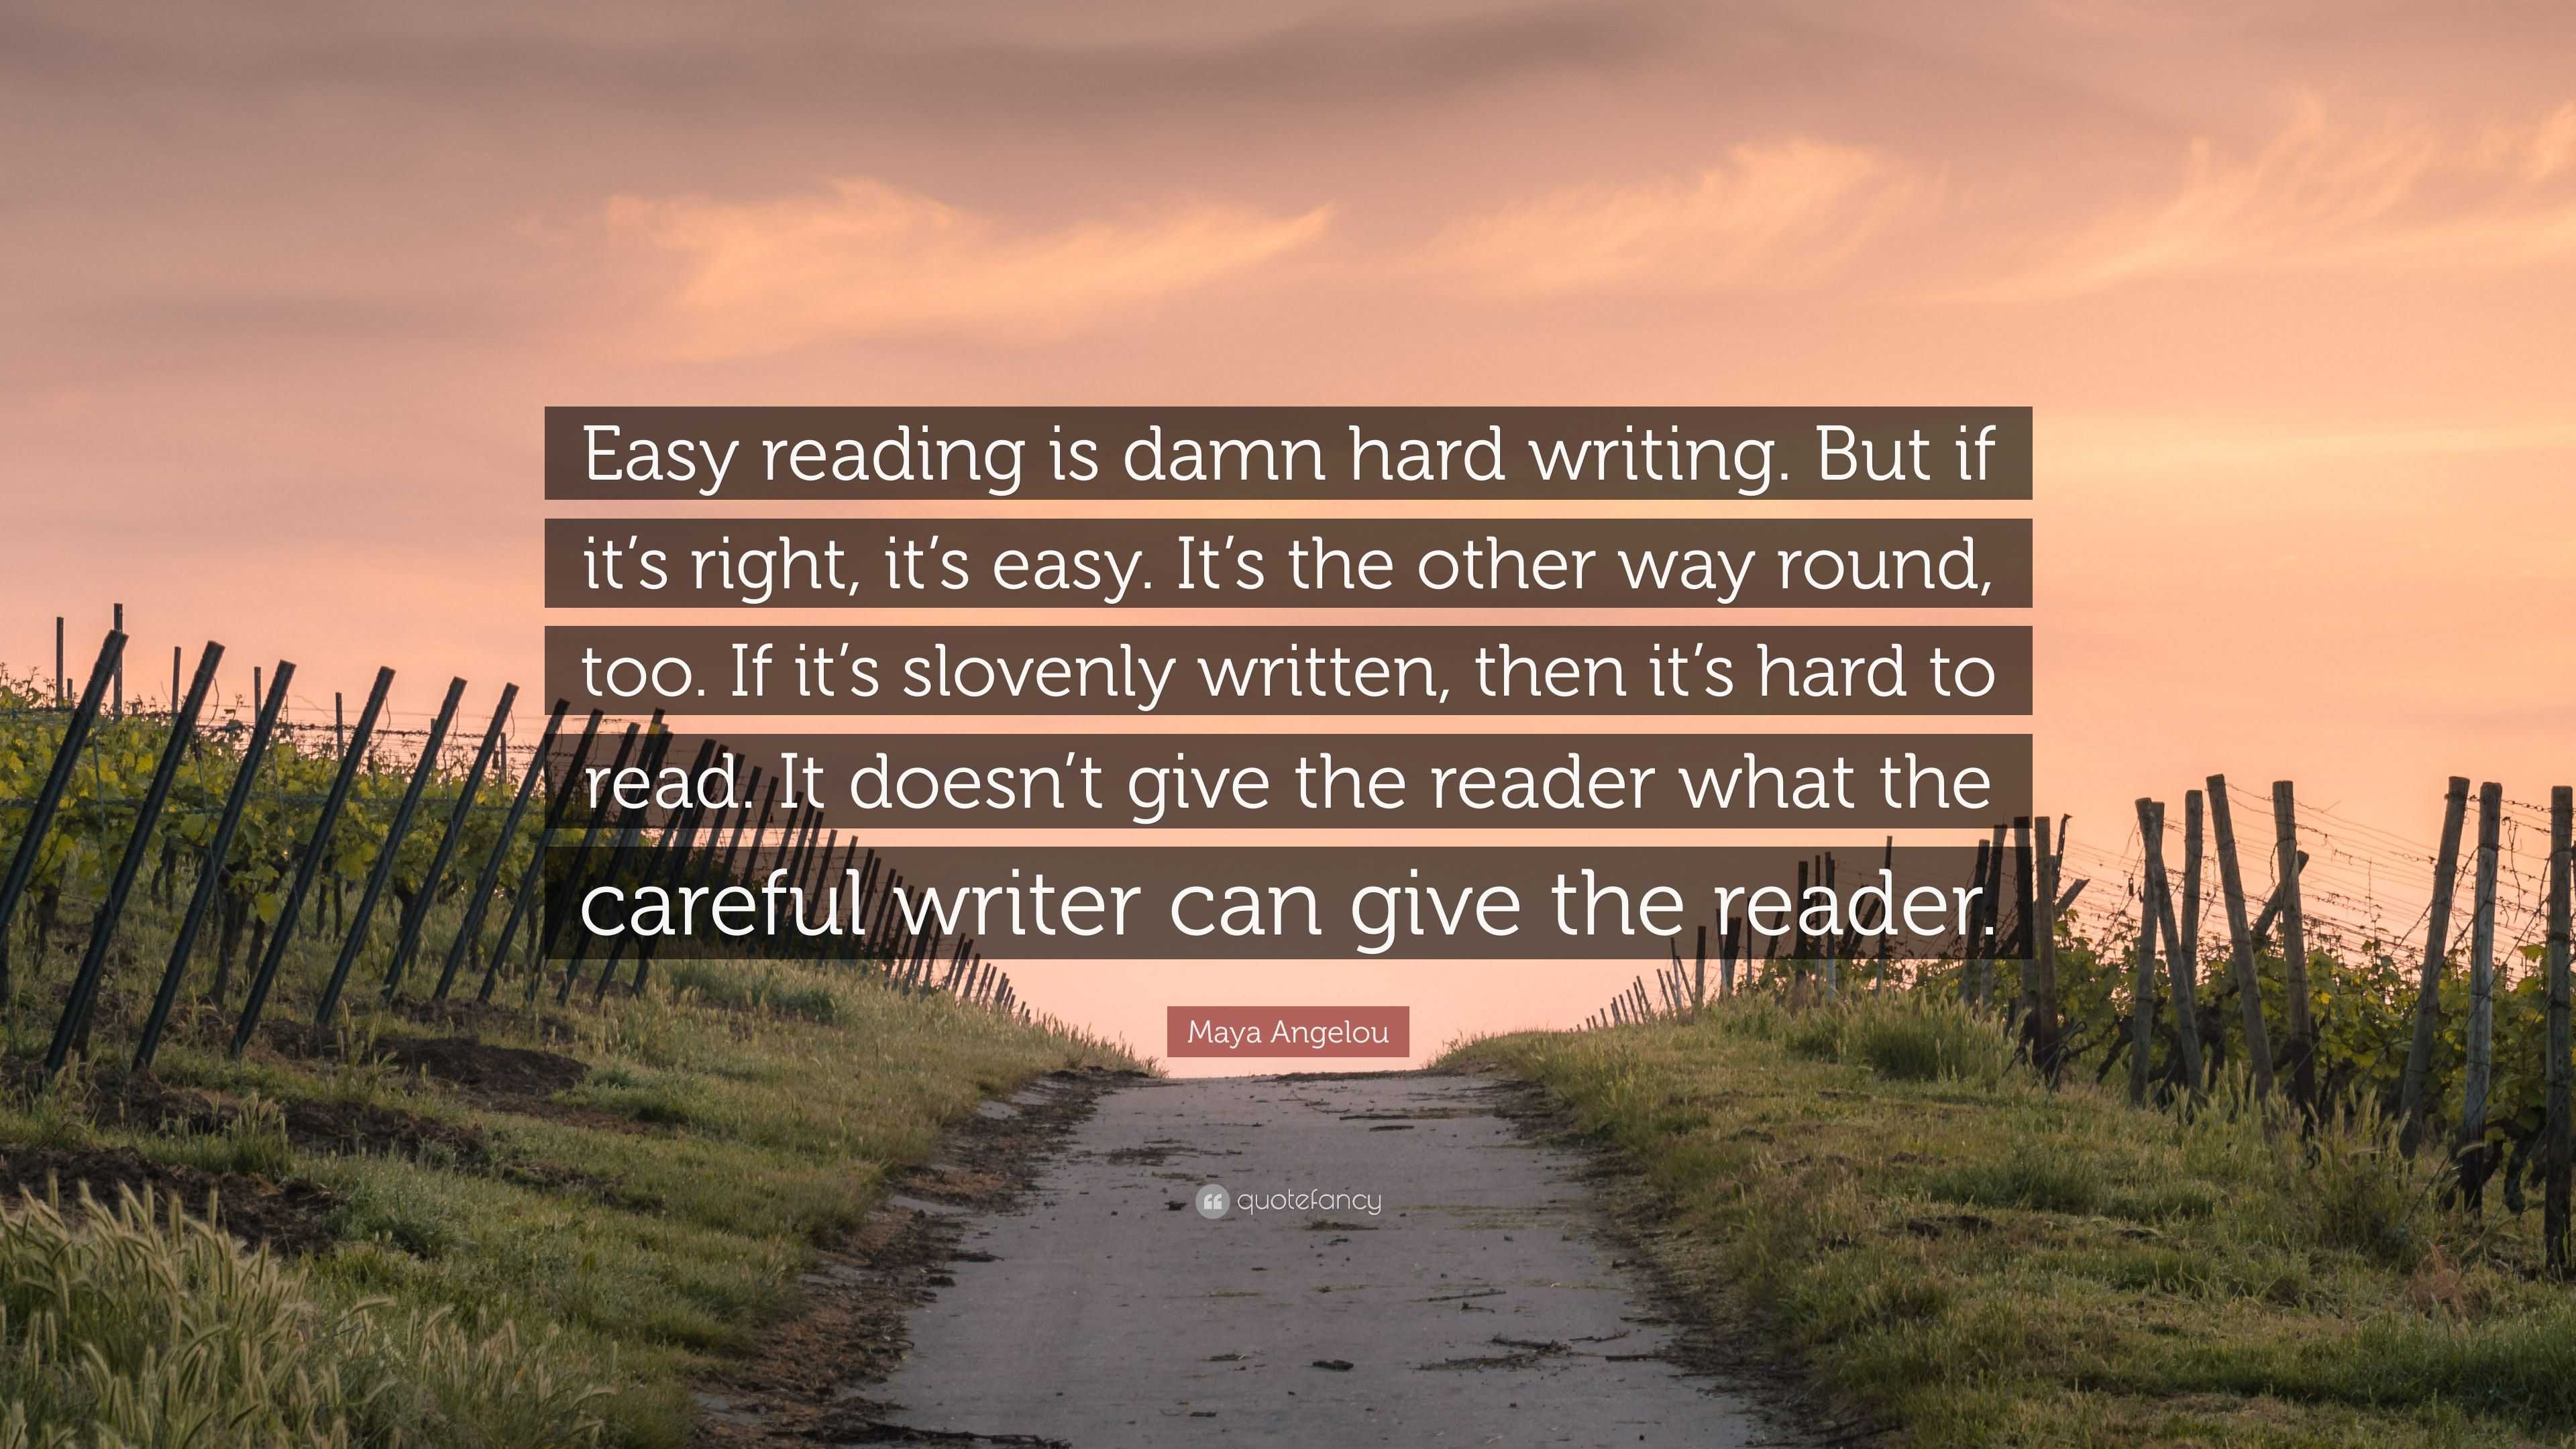 meaning of easy reading is damn hard writing